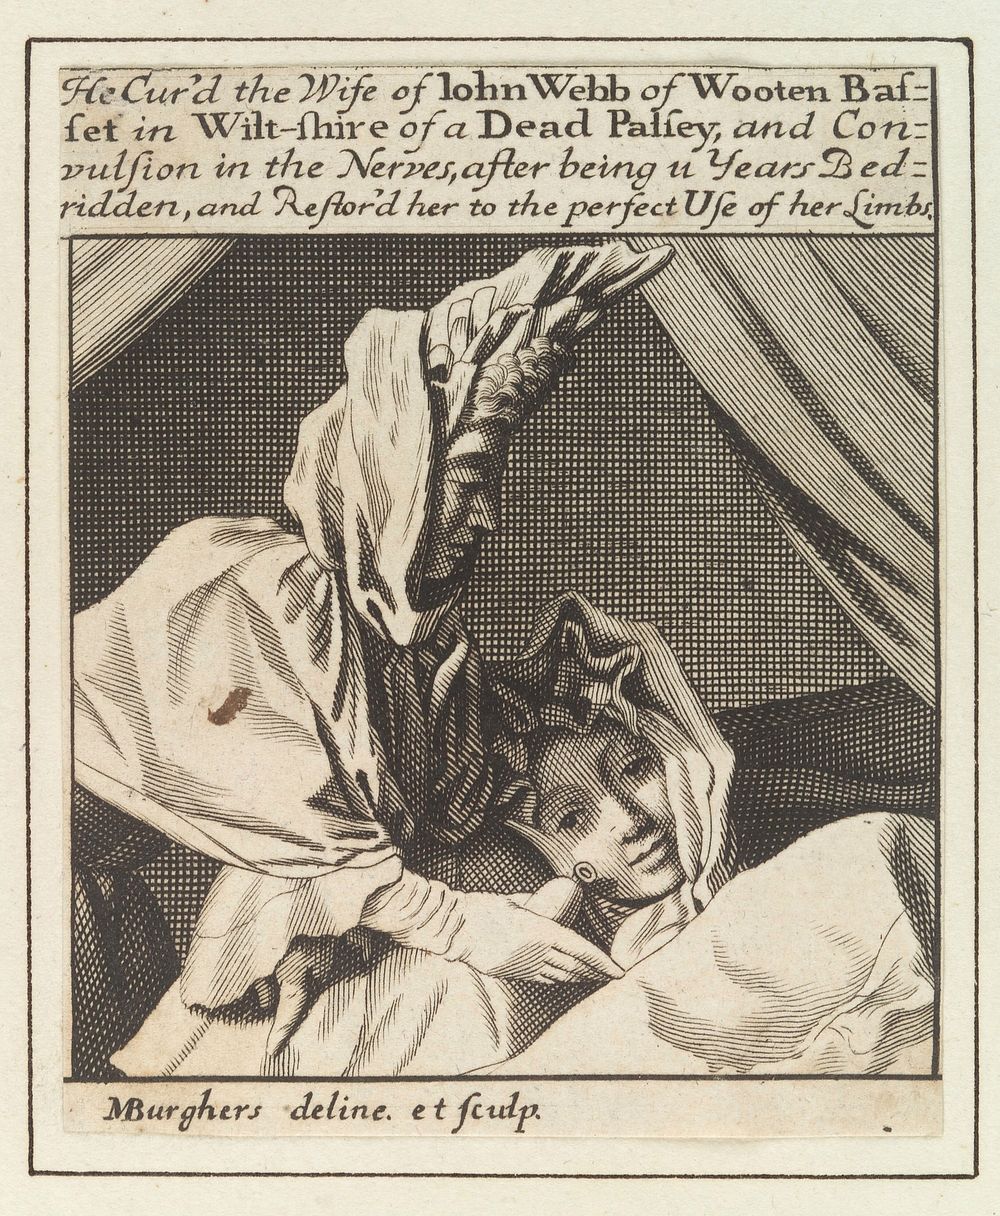 Mrs John Webb, being nursed when sick in bed with "a dead palsey, and ... convulsion in the nerves", before being cured by…